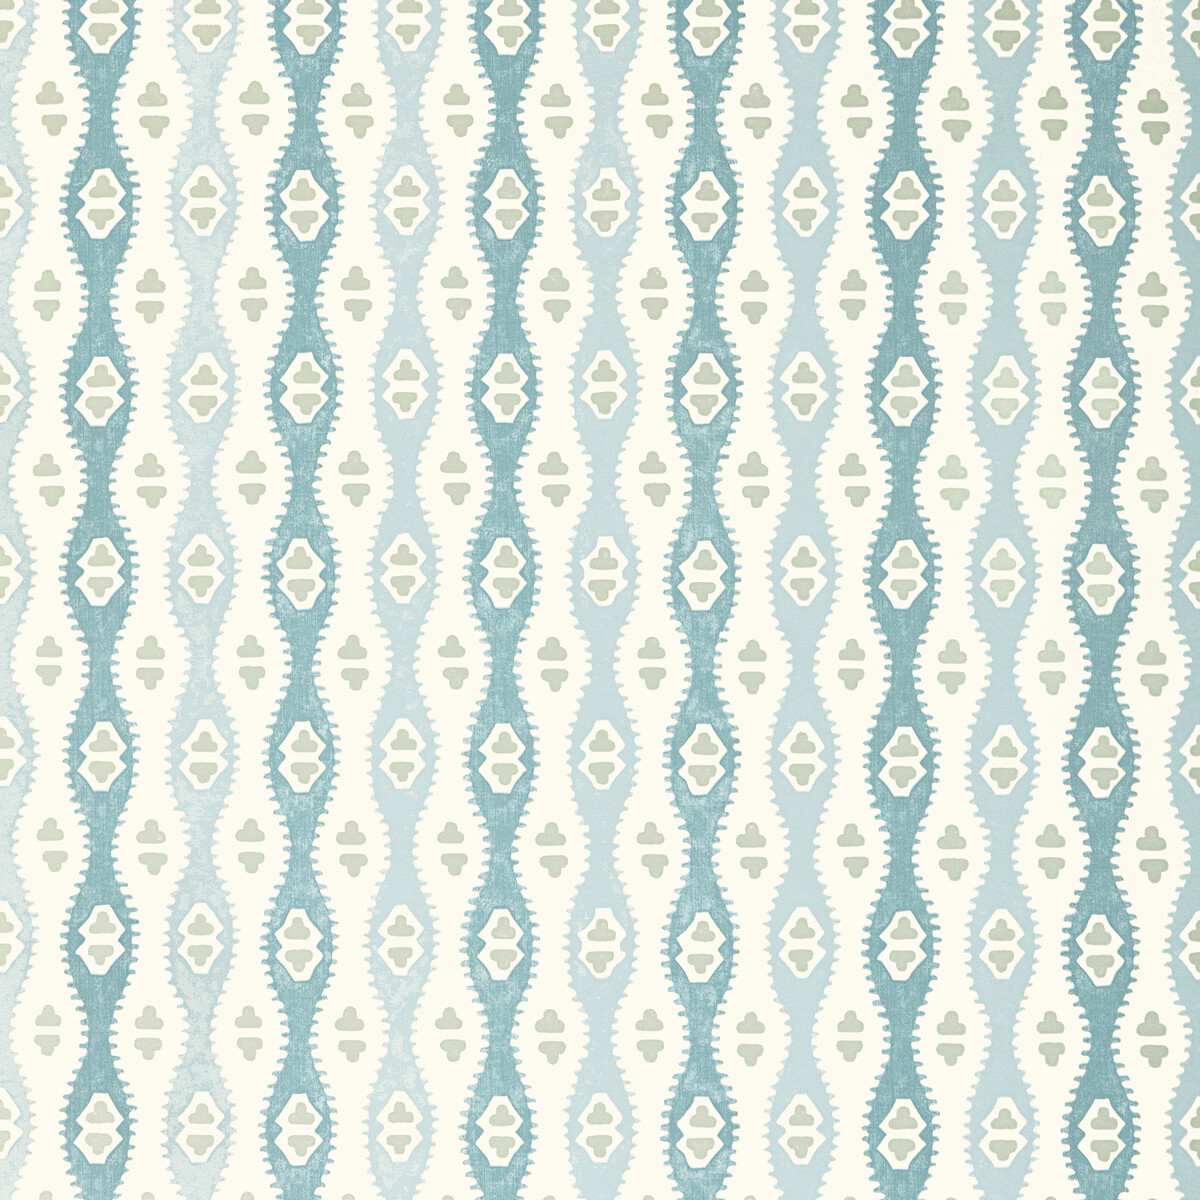 Lee Jofa P2020113.135.0 Elba Paper Wallcovering in Chambray/Light Blue/Turquoise